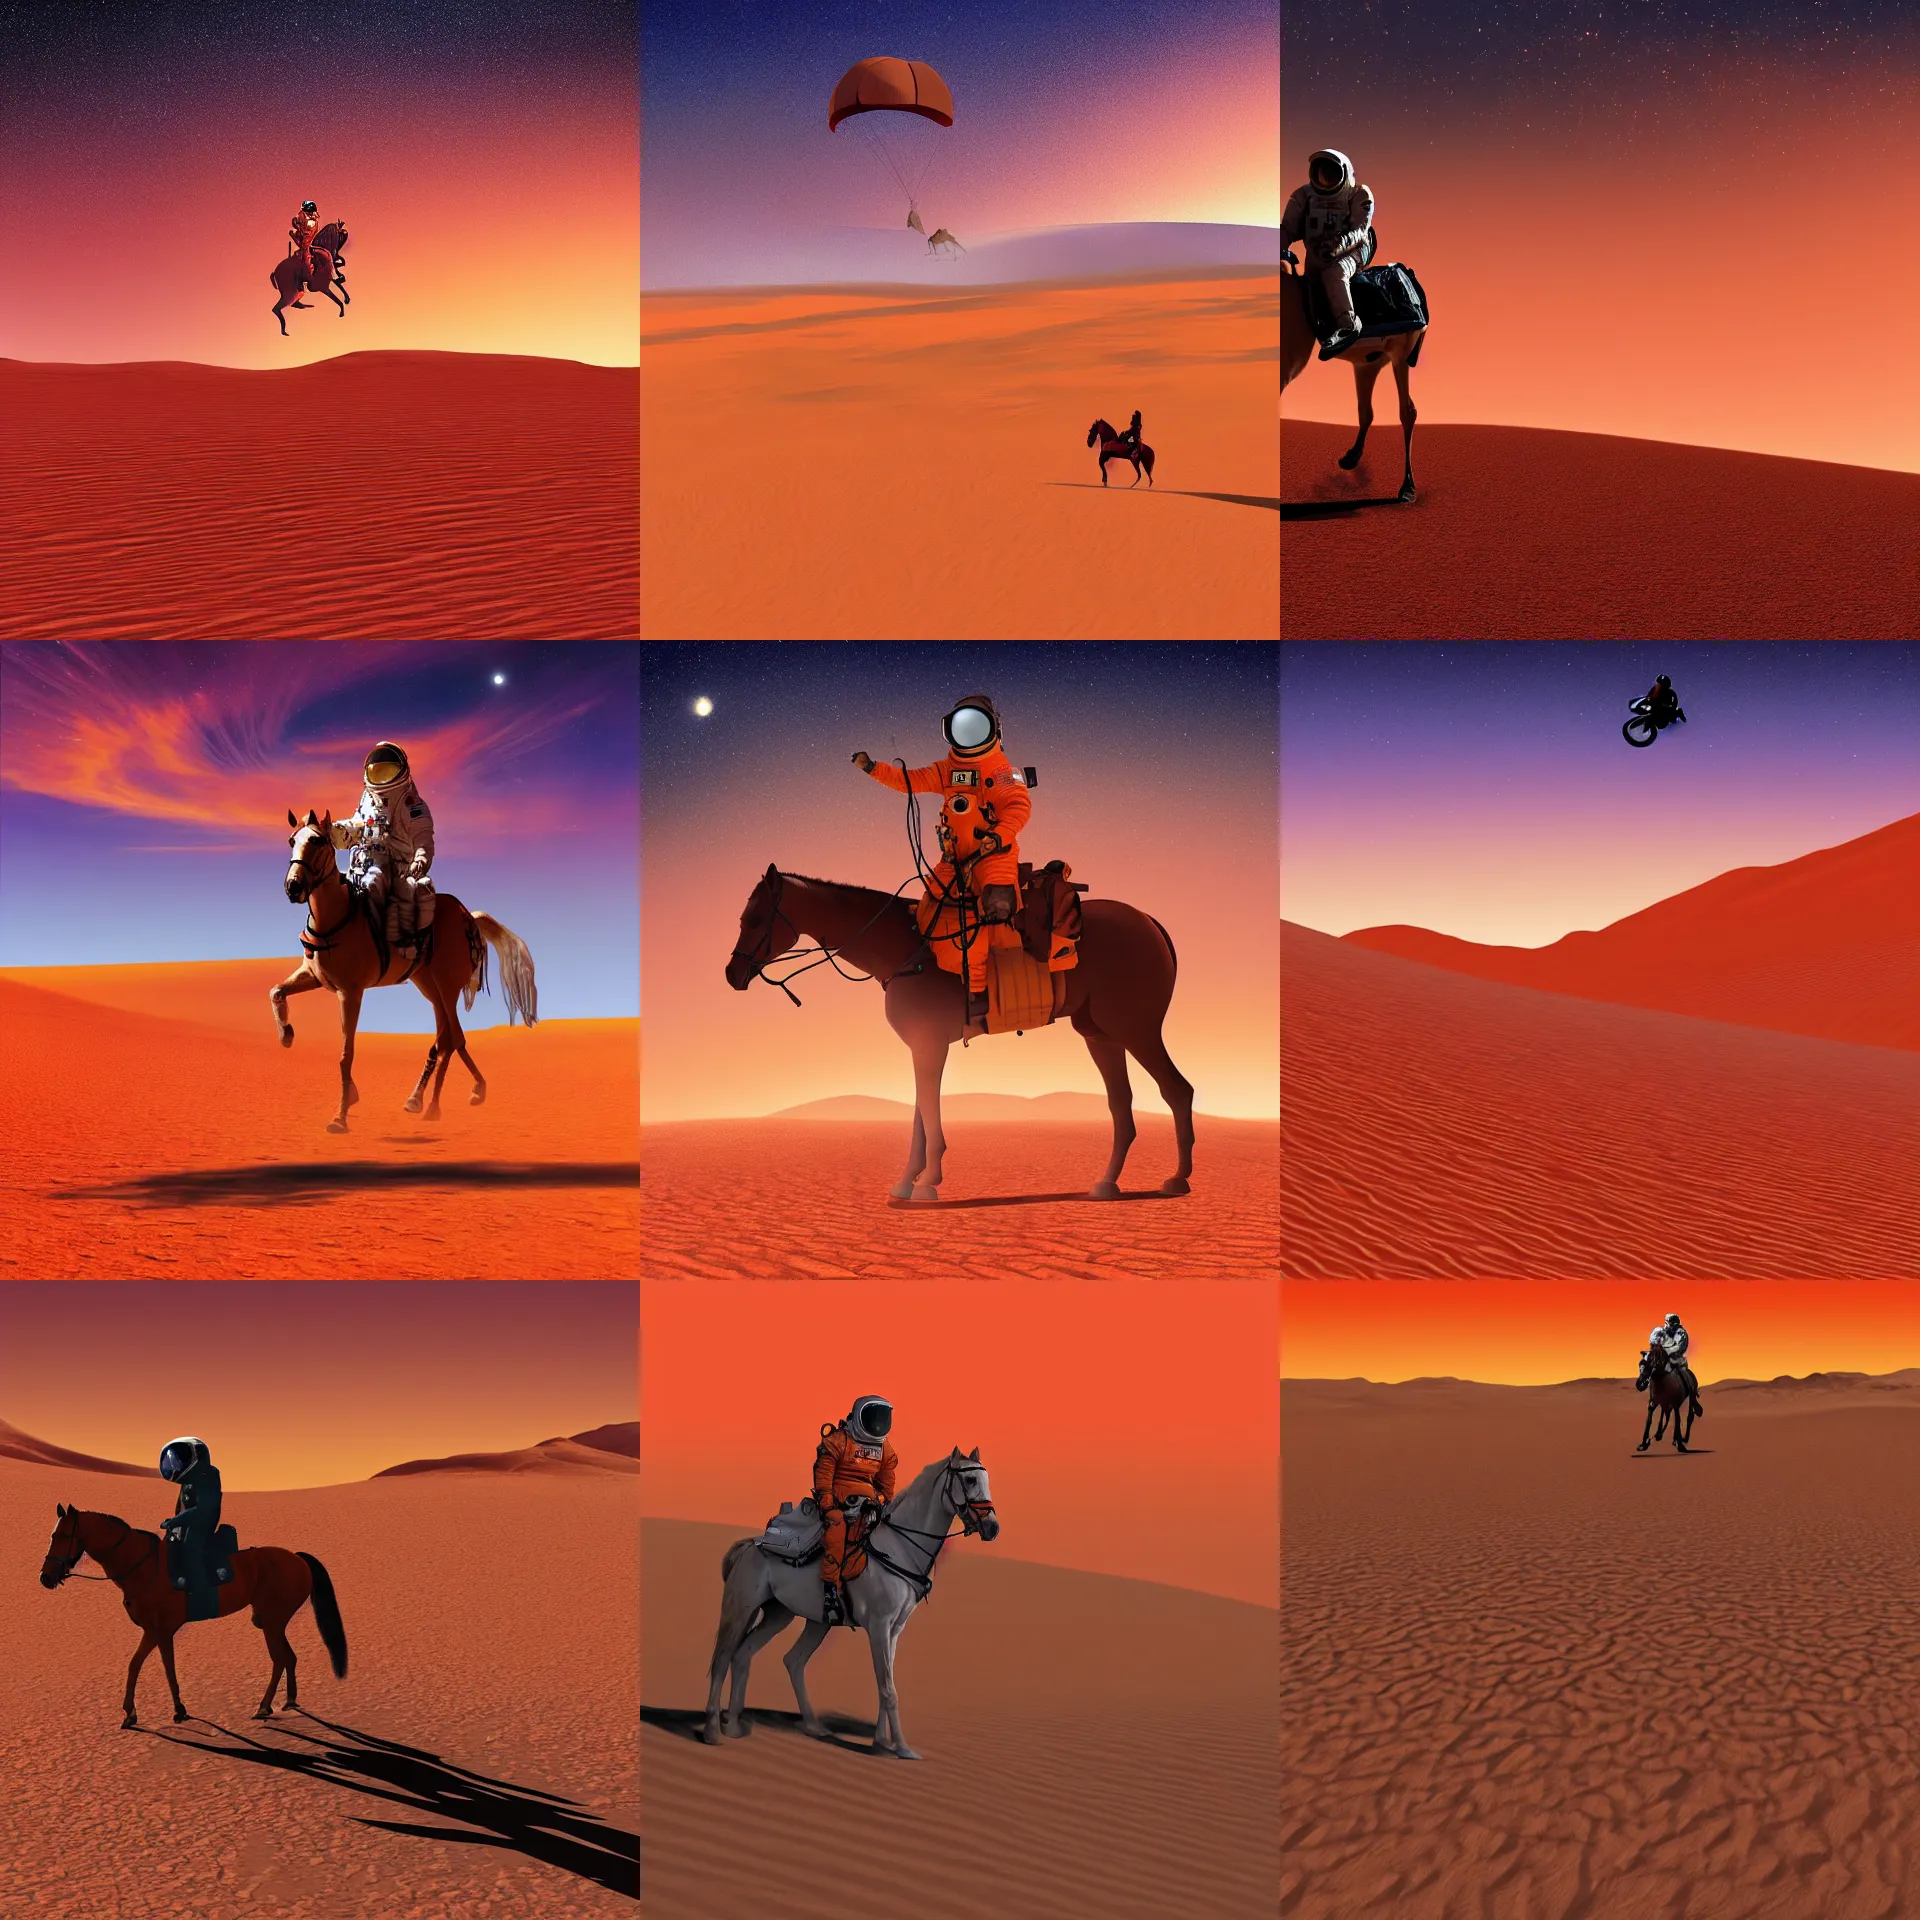 Prompt: an astronaut riding a horse on the desert dunes of mars with an orange color sky in the background, digital art